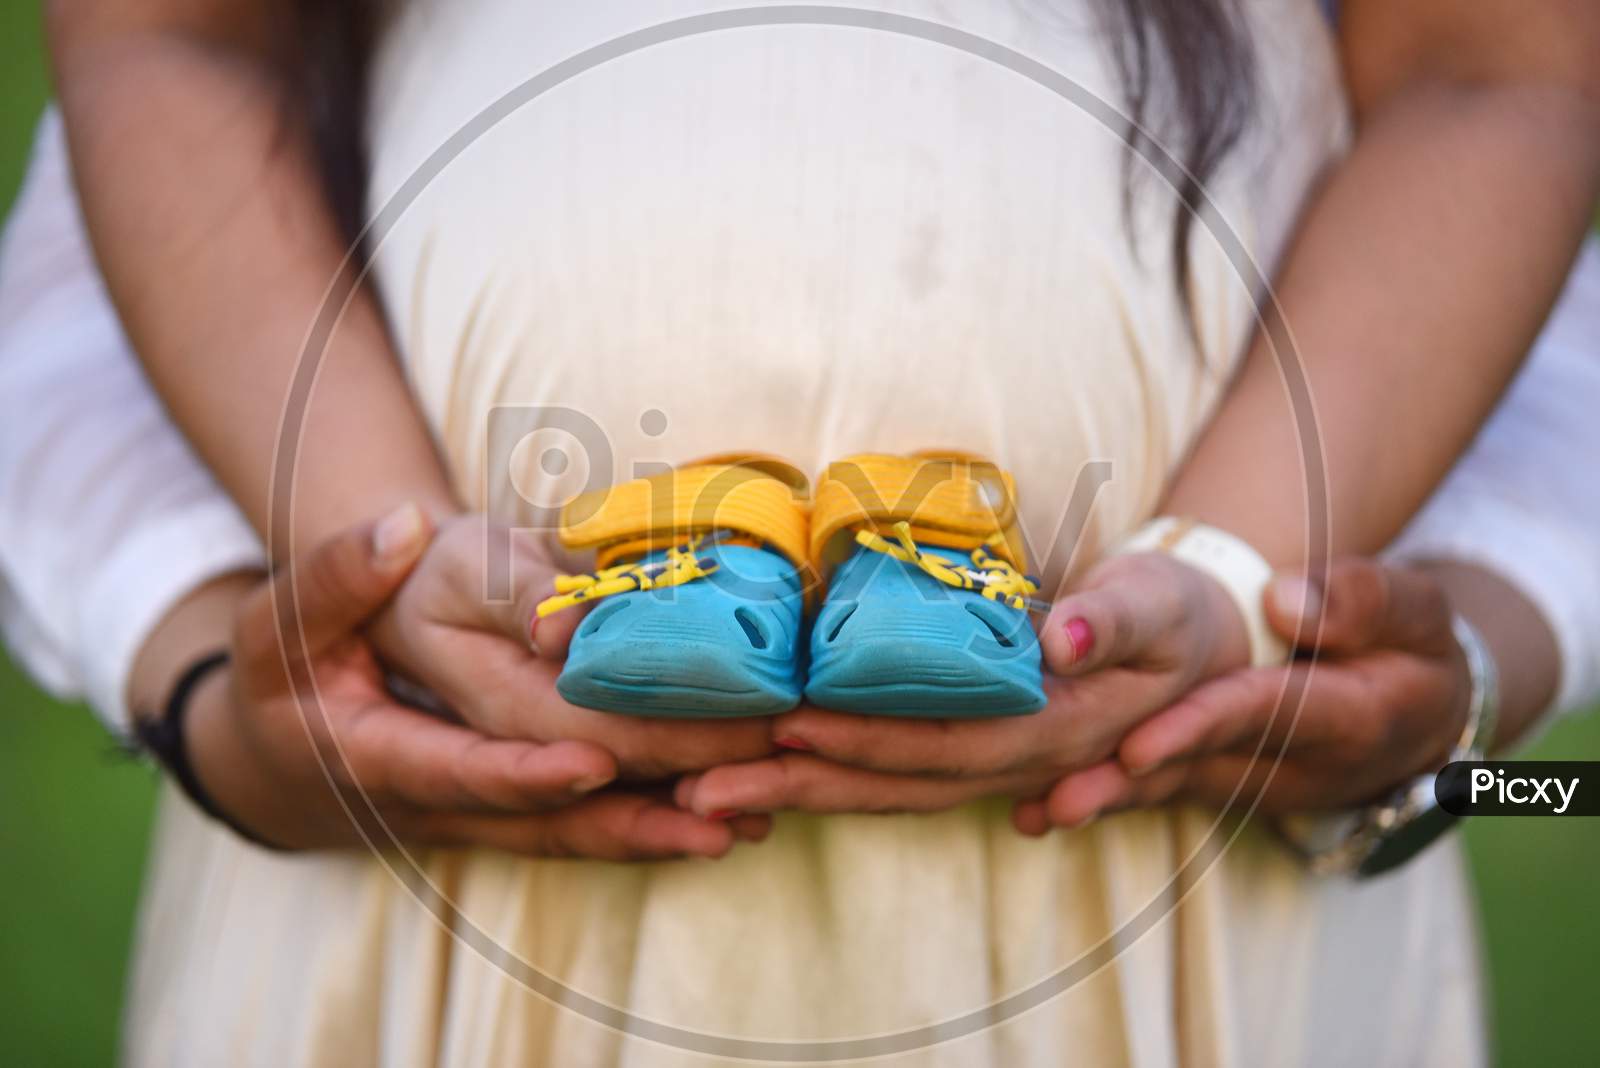 Newborn Baby Booties In Parents Hands, Pregnant Woman Belly. Maternity Concept .